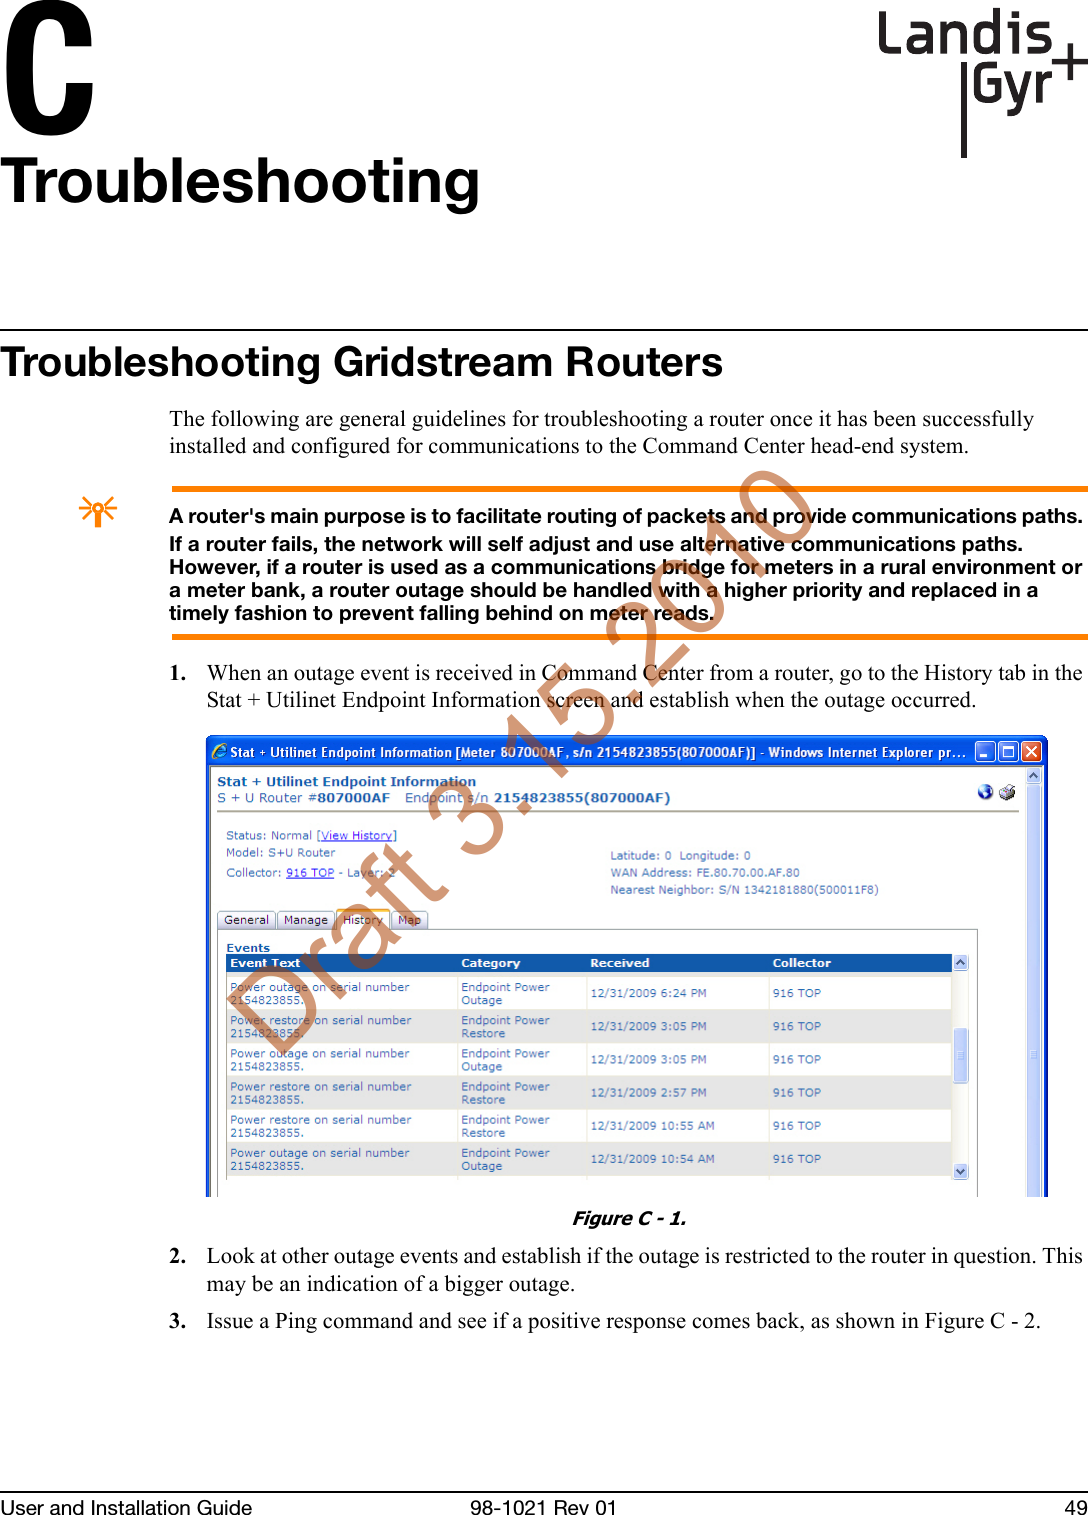 CUser and Installation Guide 98-1021 Rev 01 49TroubleshootingTroubleshooting Gridstream RoutersThe following are general guidelines for troubleshooting a router once it has been successfully installed and configured for communications to the Command Center head-end system.AA router&apos;s main purpose is to facilitate routing of packets and provide communications paths. If a router fails, the network will self adjust and use alternative communications paths. However, if a router is used as a communications bridge for meters in a rural environment or a meter bank, a router outage should be handled with a higher priority and replaced in a timely fashion to prevent falling behind on meter reads.1. When an outage event is received in Command Center from a router, go to the History tab in the Stat + Utilinet Endpoint Information screen and establish when the outage occurred.Figure C - 1. 2. Look at other outage events and establish if the outage is restricted to the router in question. This may be an indication of a bigger outage.3. Issue a Ping command and see if a positive response comes back, as shown in Figure C - 2.Draft 3.15.2010